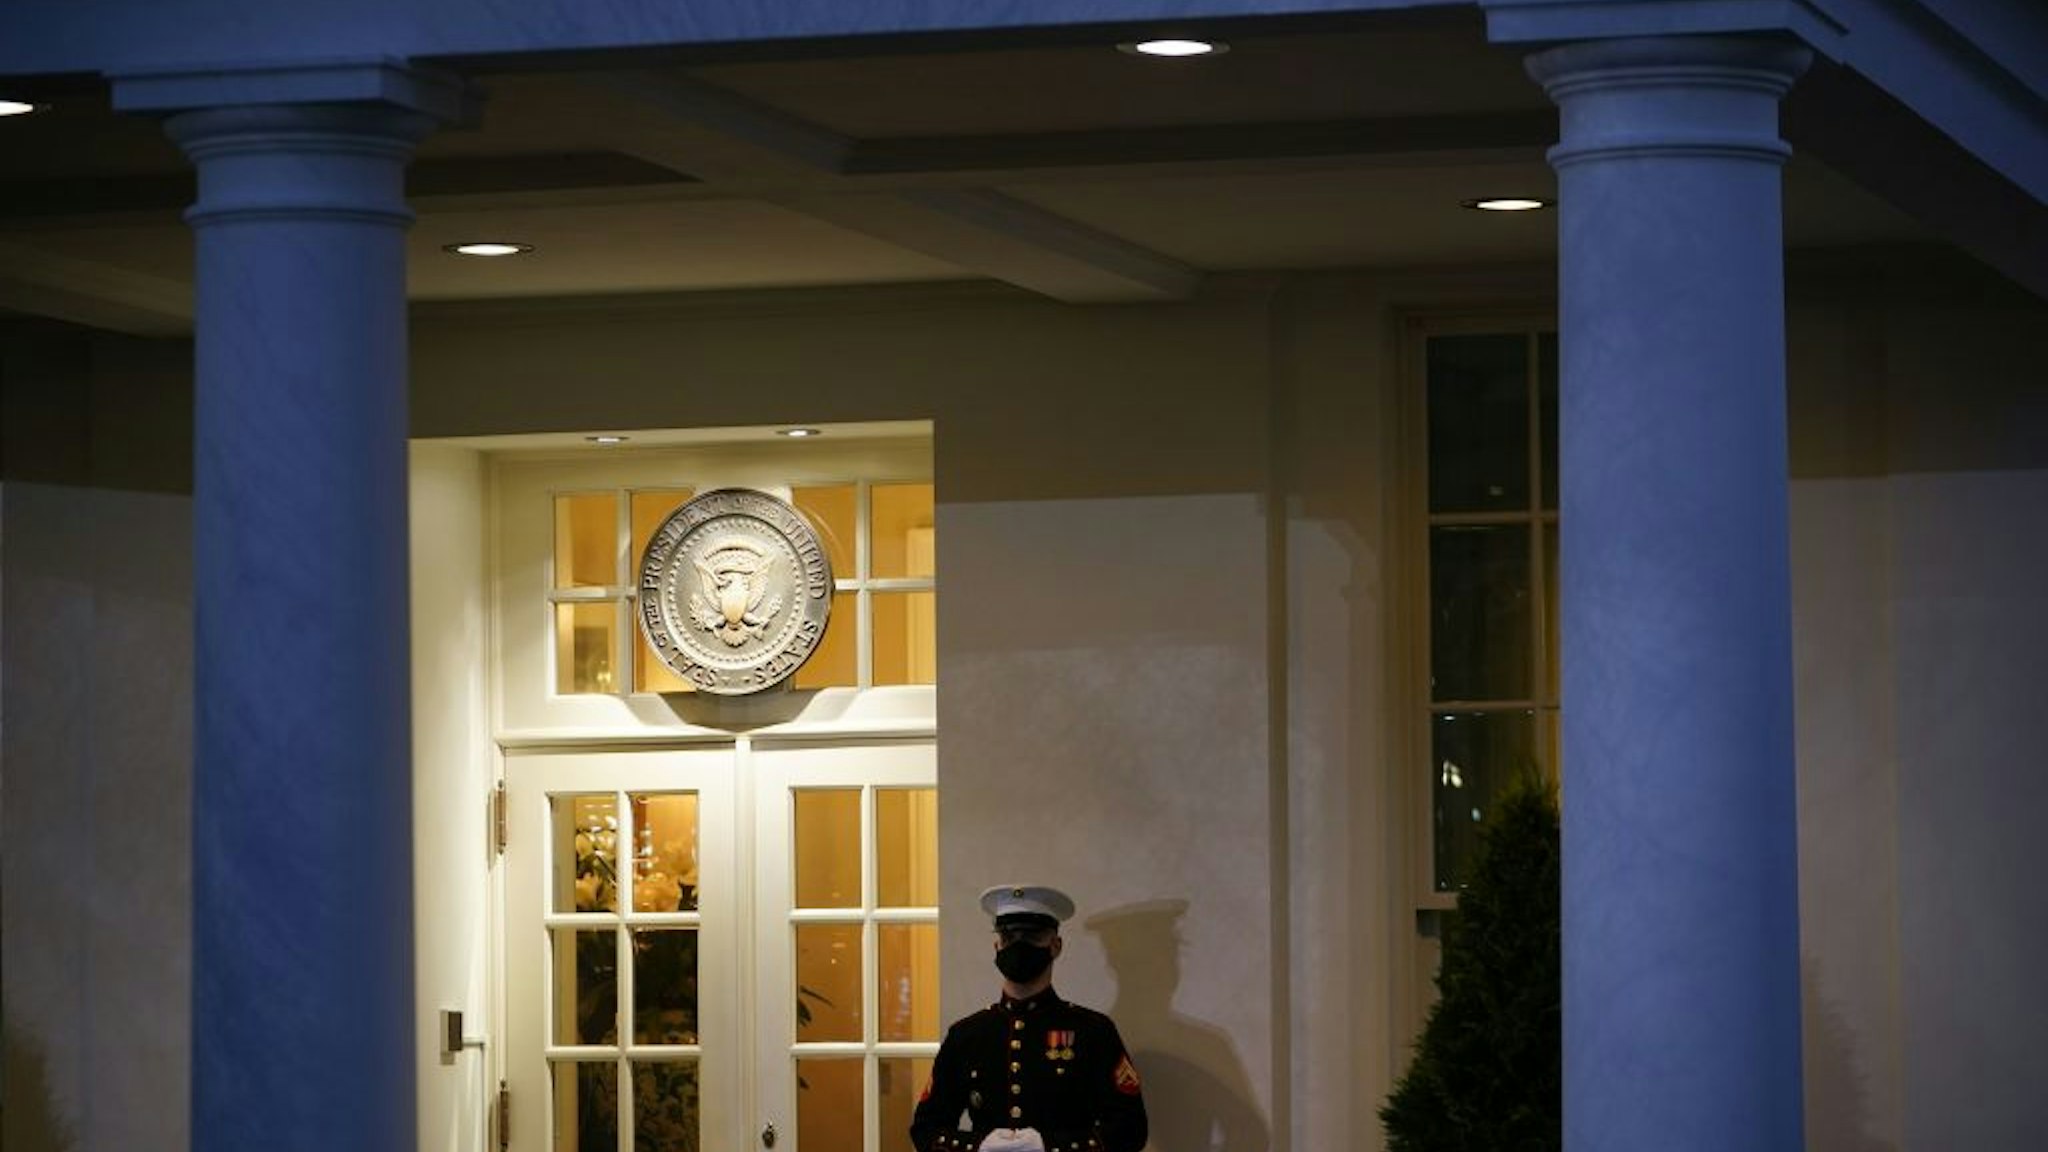 A US Marine stands guard outside of the West Wing at dusk on US President Donald Trump's final full day in office, in Washington, DC on January 19, 2021. - President Donald Trump began his final full day in the White House on January 19, 2021 with a long list of possible pardons to dish out before snubbing his successor Joe Biden's inauguration and leaving for Florida. On January 20, 2021 at noon, Biden will be sworn in and the Trump presidency will end, turning the page on some of the most disruptive, divisive years the United States has seen since the 1960s. (Photo by MANDEL NGAN / AFP) (Photo by MANDEL NGAN/AFP via Getty Images)